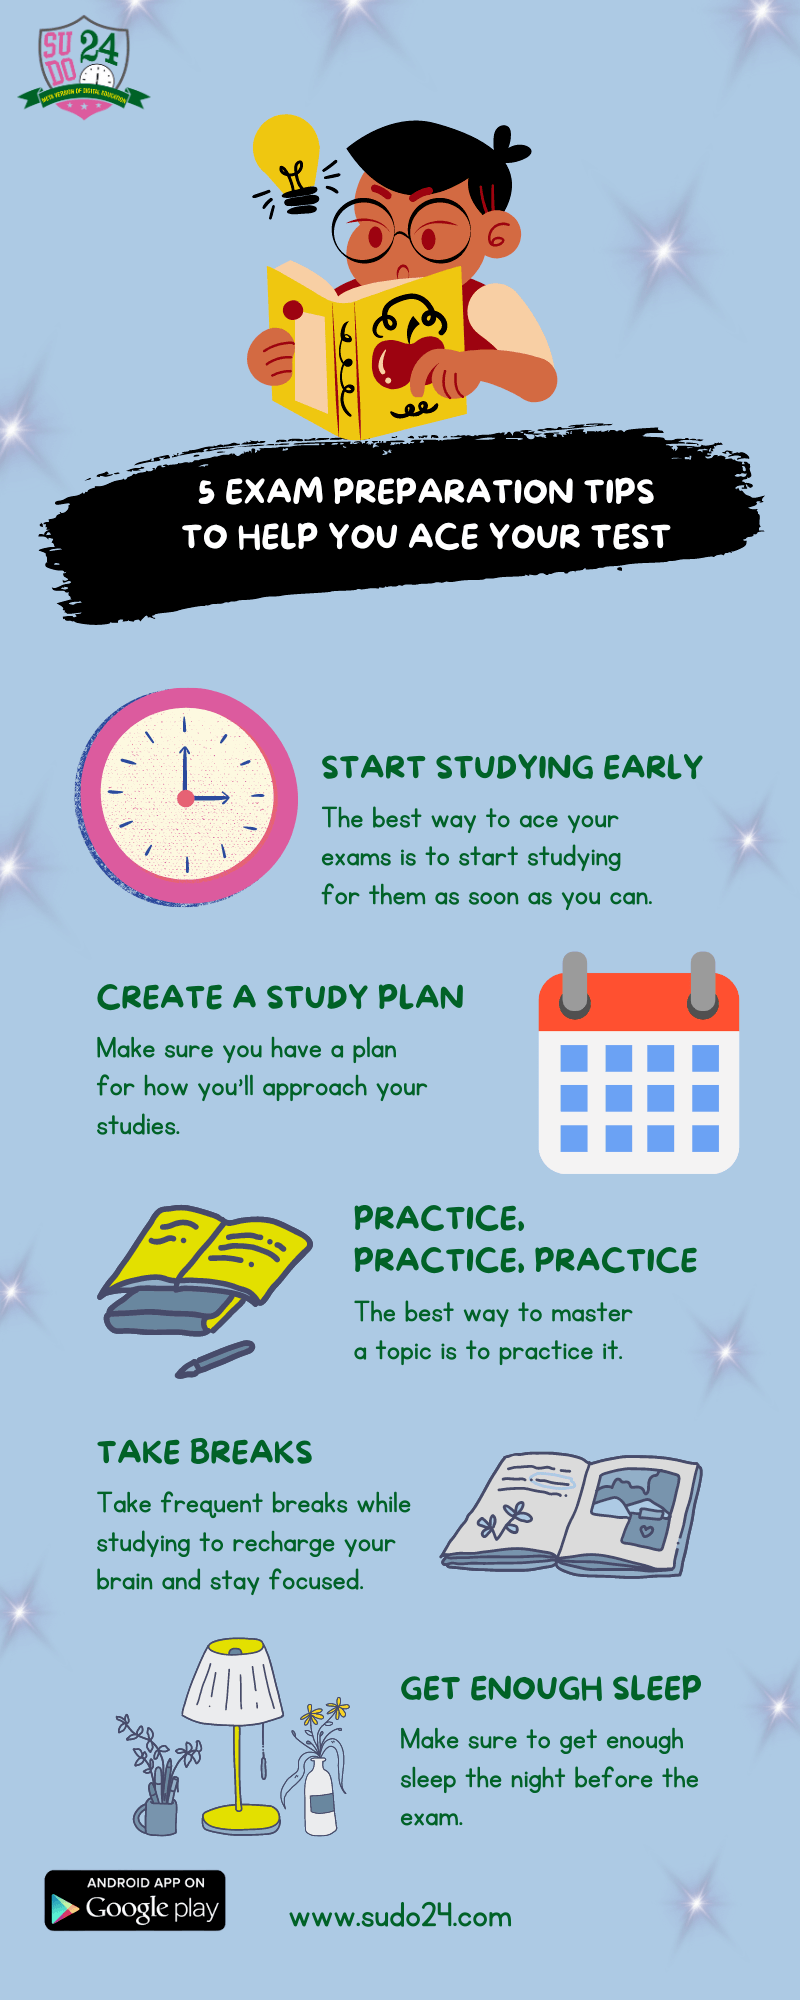 5 Exam Preparation Tips to Help You Ace Your Test